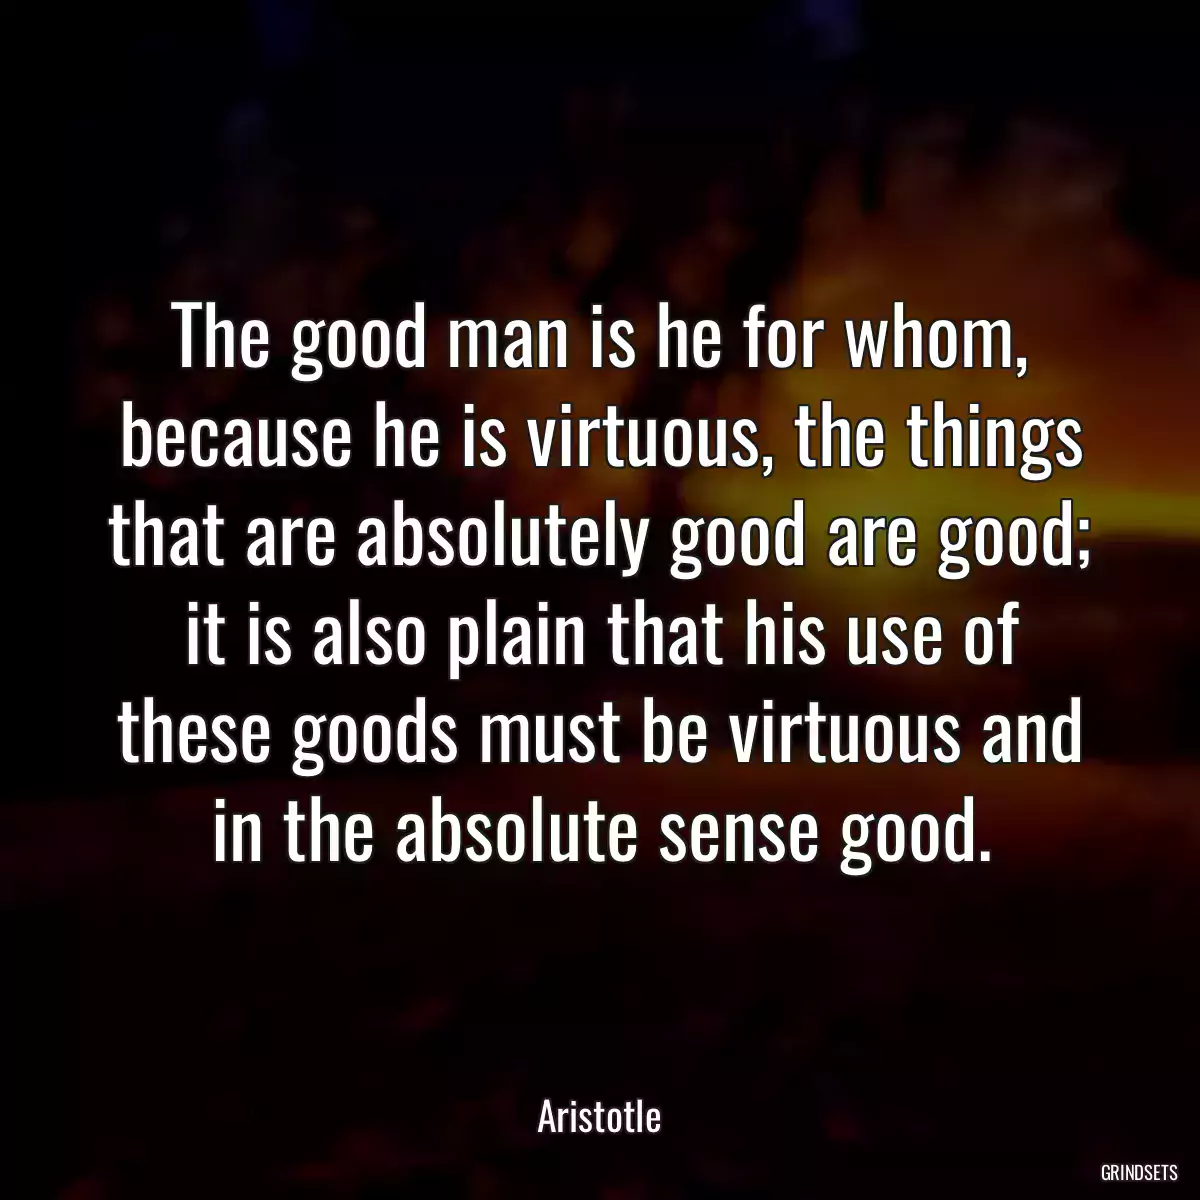 The good man is he for whom, because he is virtuous, the things that are absolutely good are good; it is also plain that his use of these goods must be virtuous and in the absolute sense good.